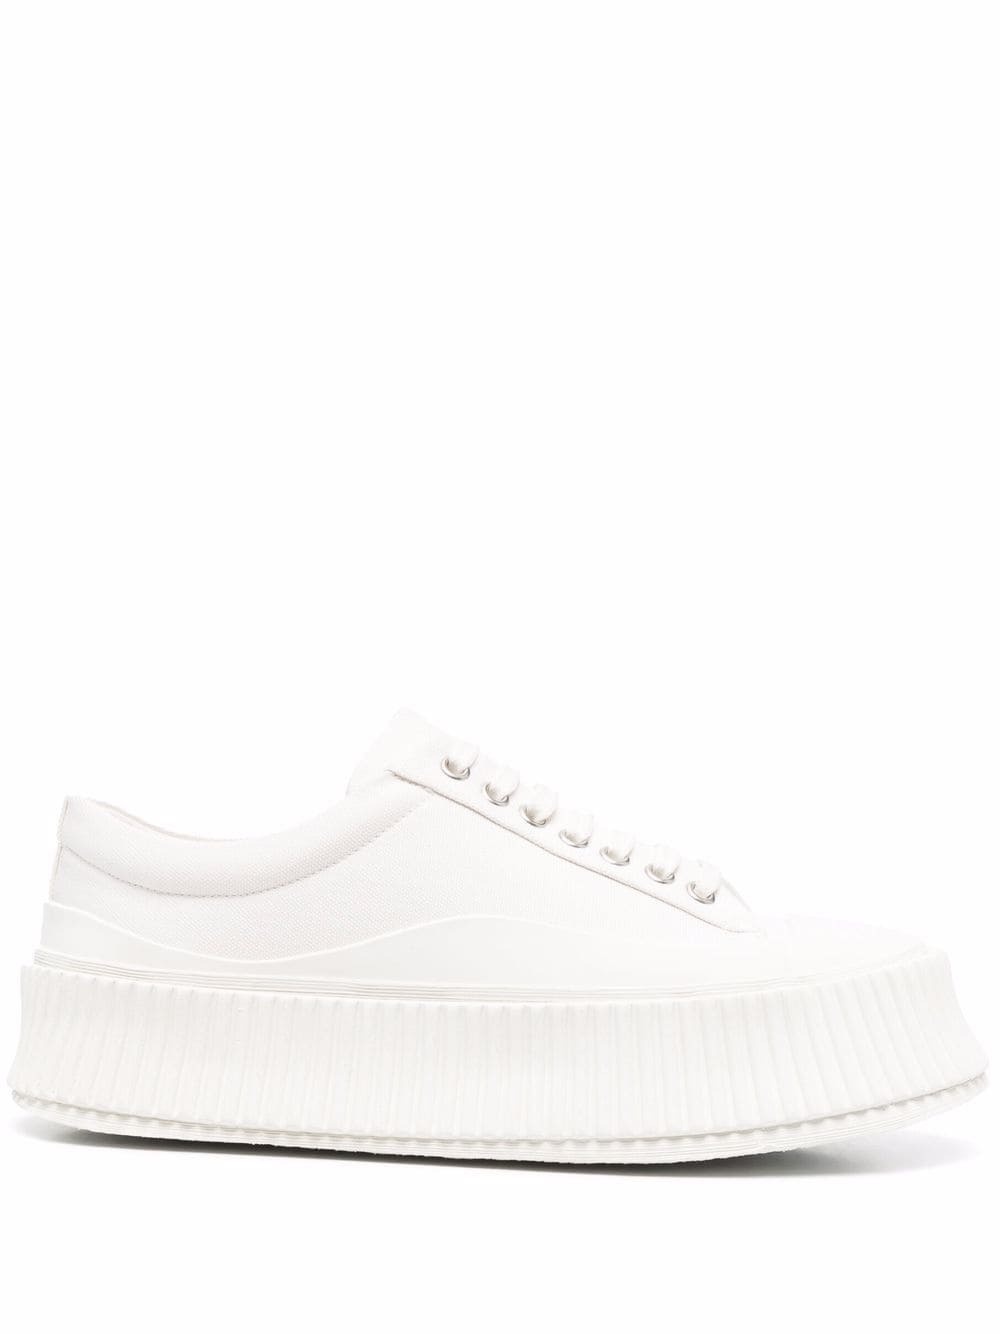 Photo: JIL SANDER - Recycled Canvas Sneakers